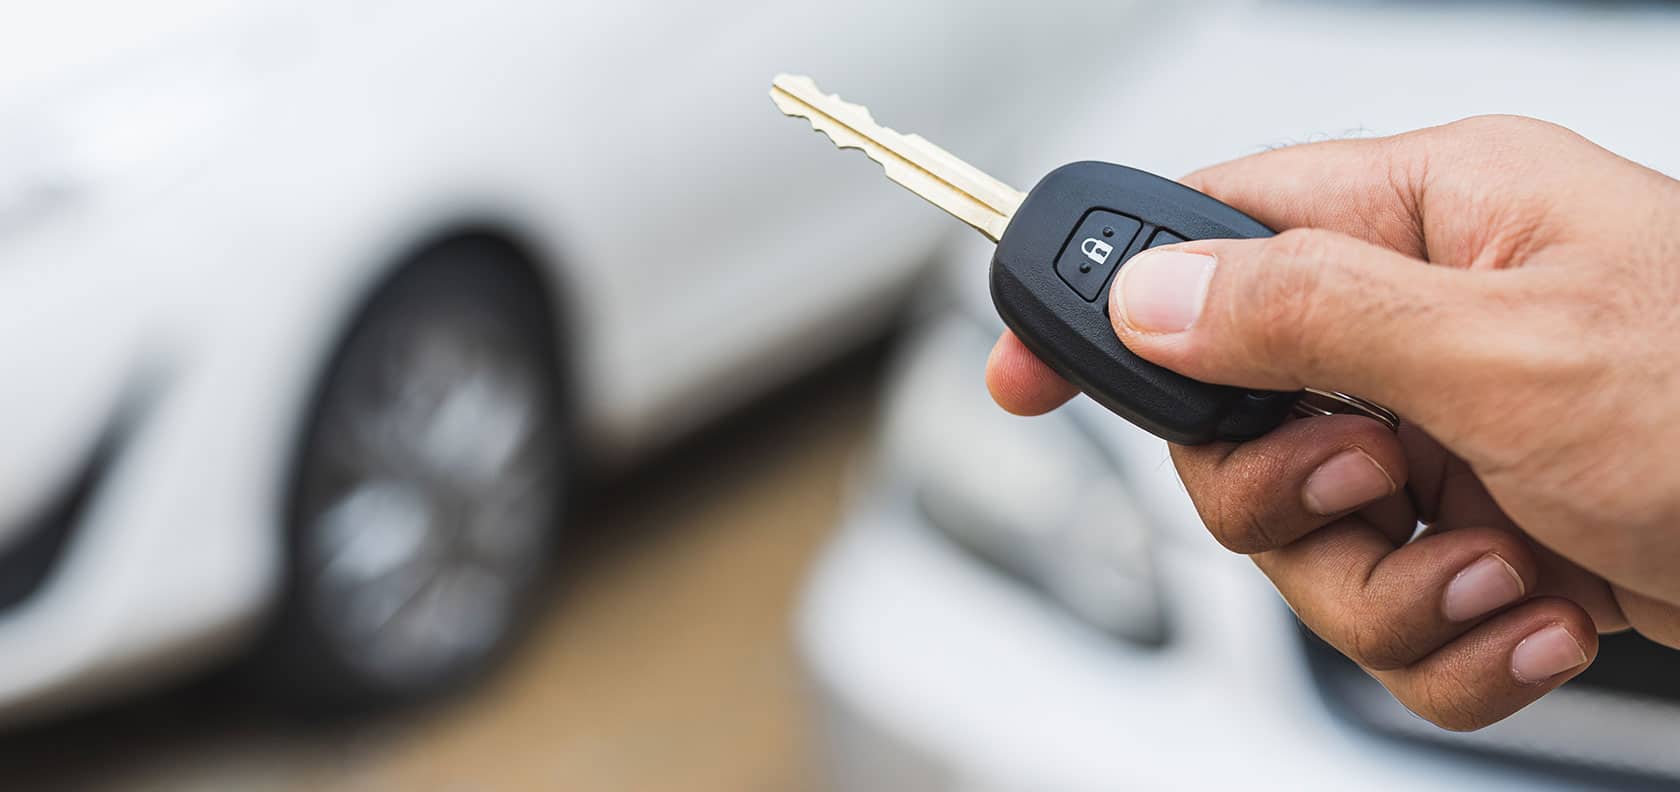 Car key opening a rented car remotely.